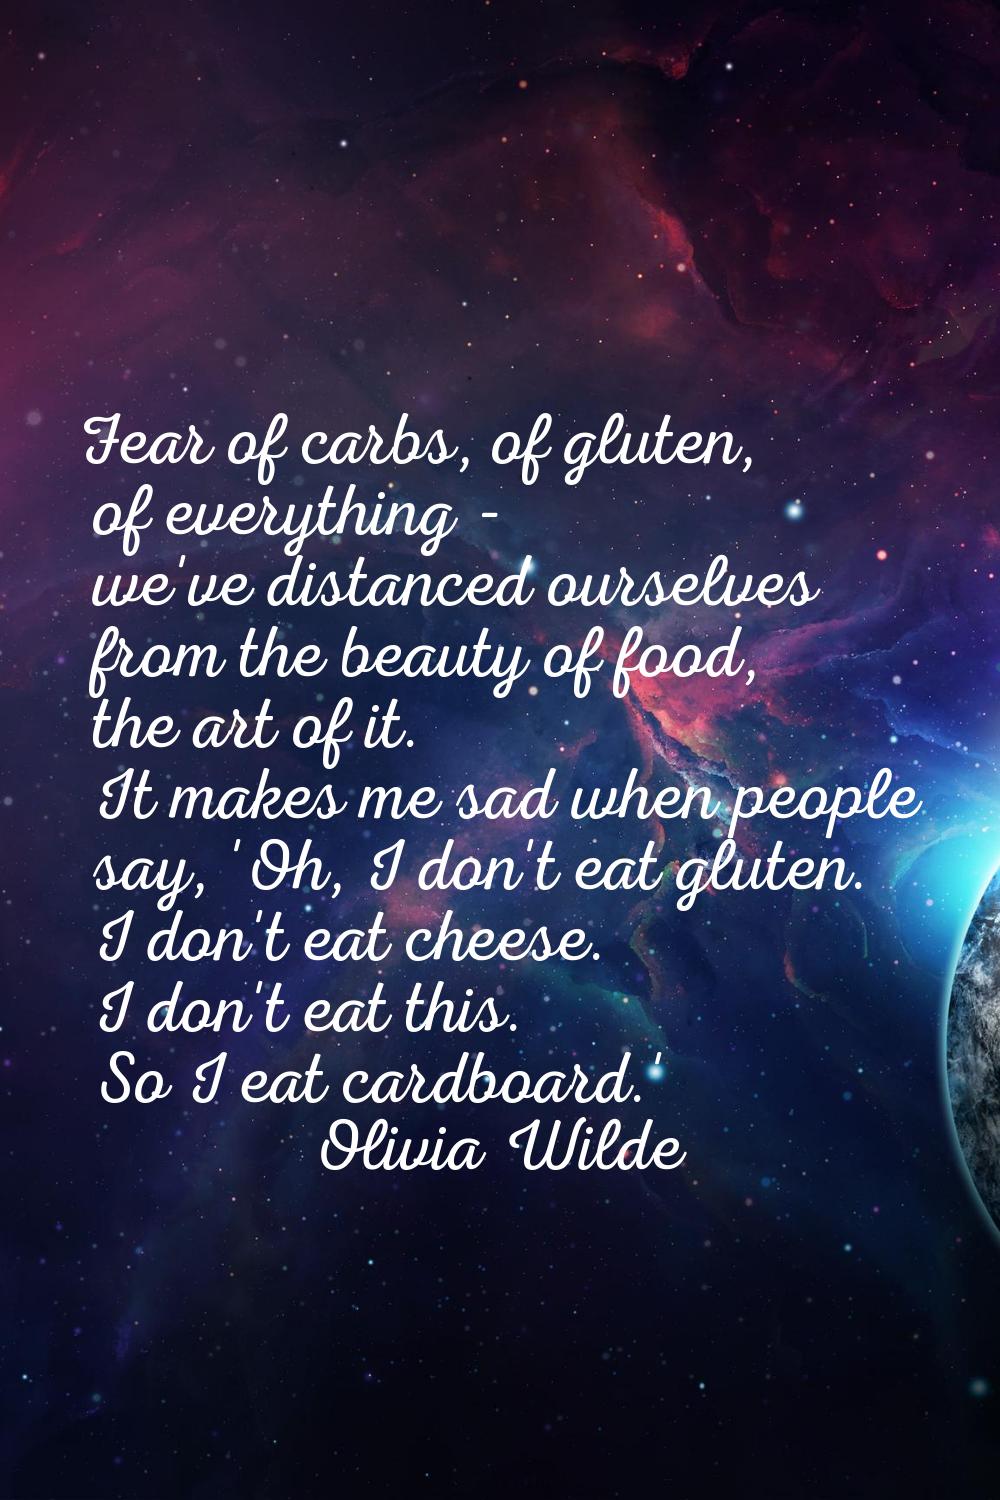 Fear of carbs, of gluten, of everything - we've distanced ourselves from the beauty of food, the ar